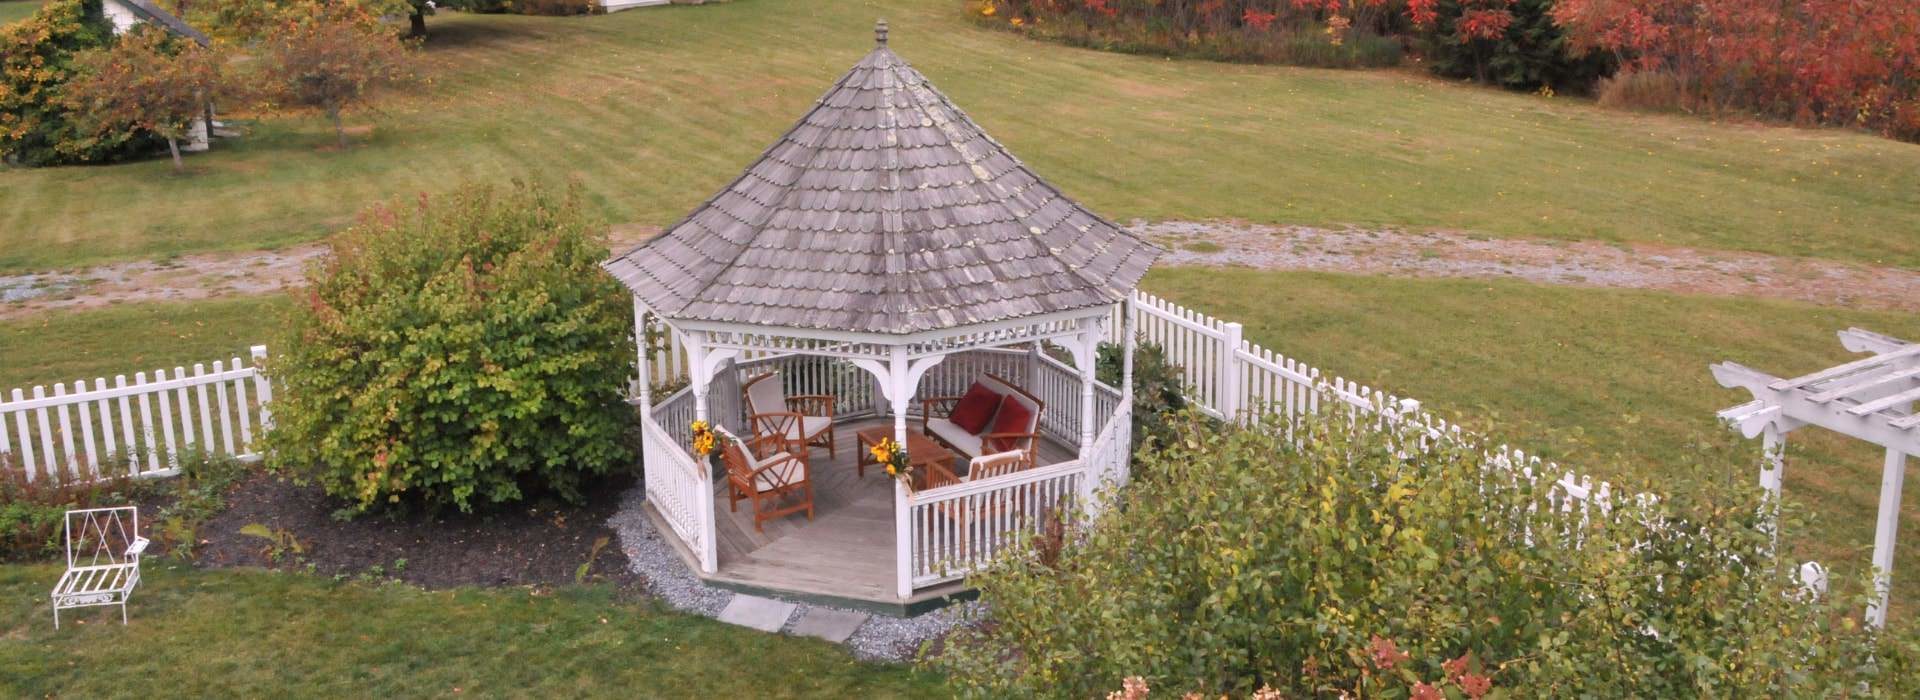 Pretty white gazebo with a grey roof covering a seating area in the corner of a yard surrounded by a white picket fence.